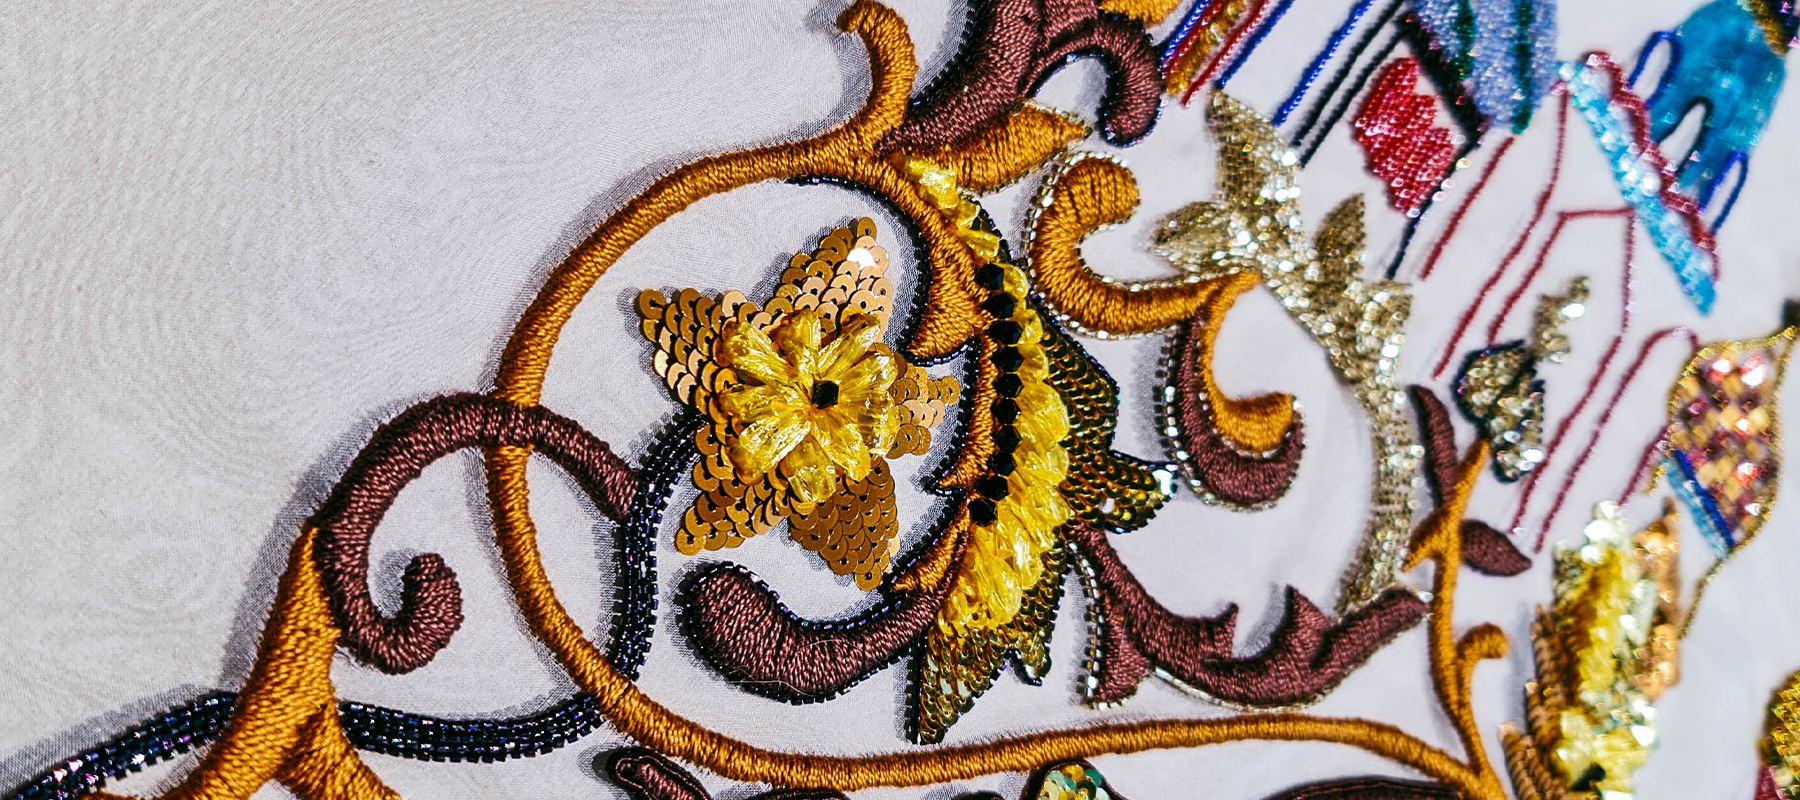 Couture embroidery artist Level 3